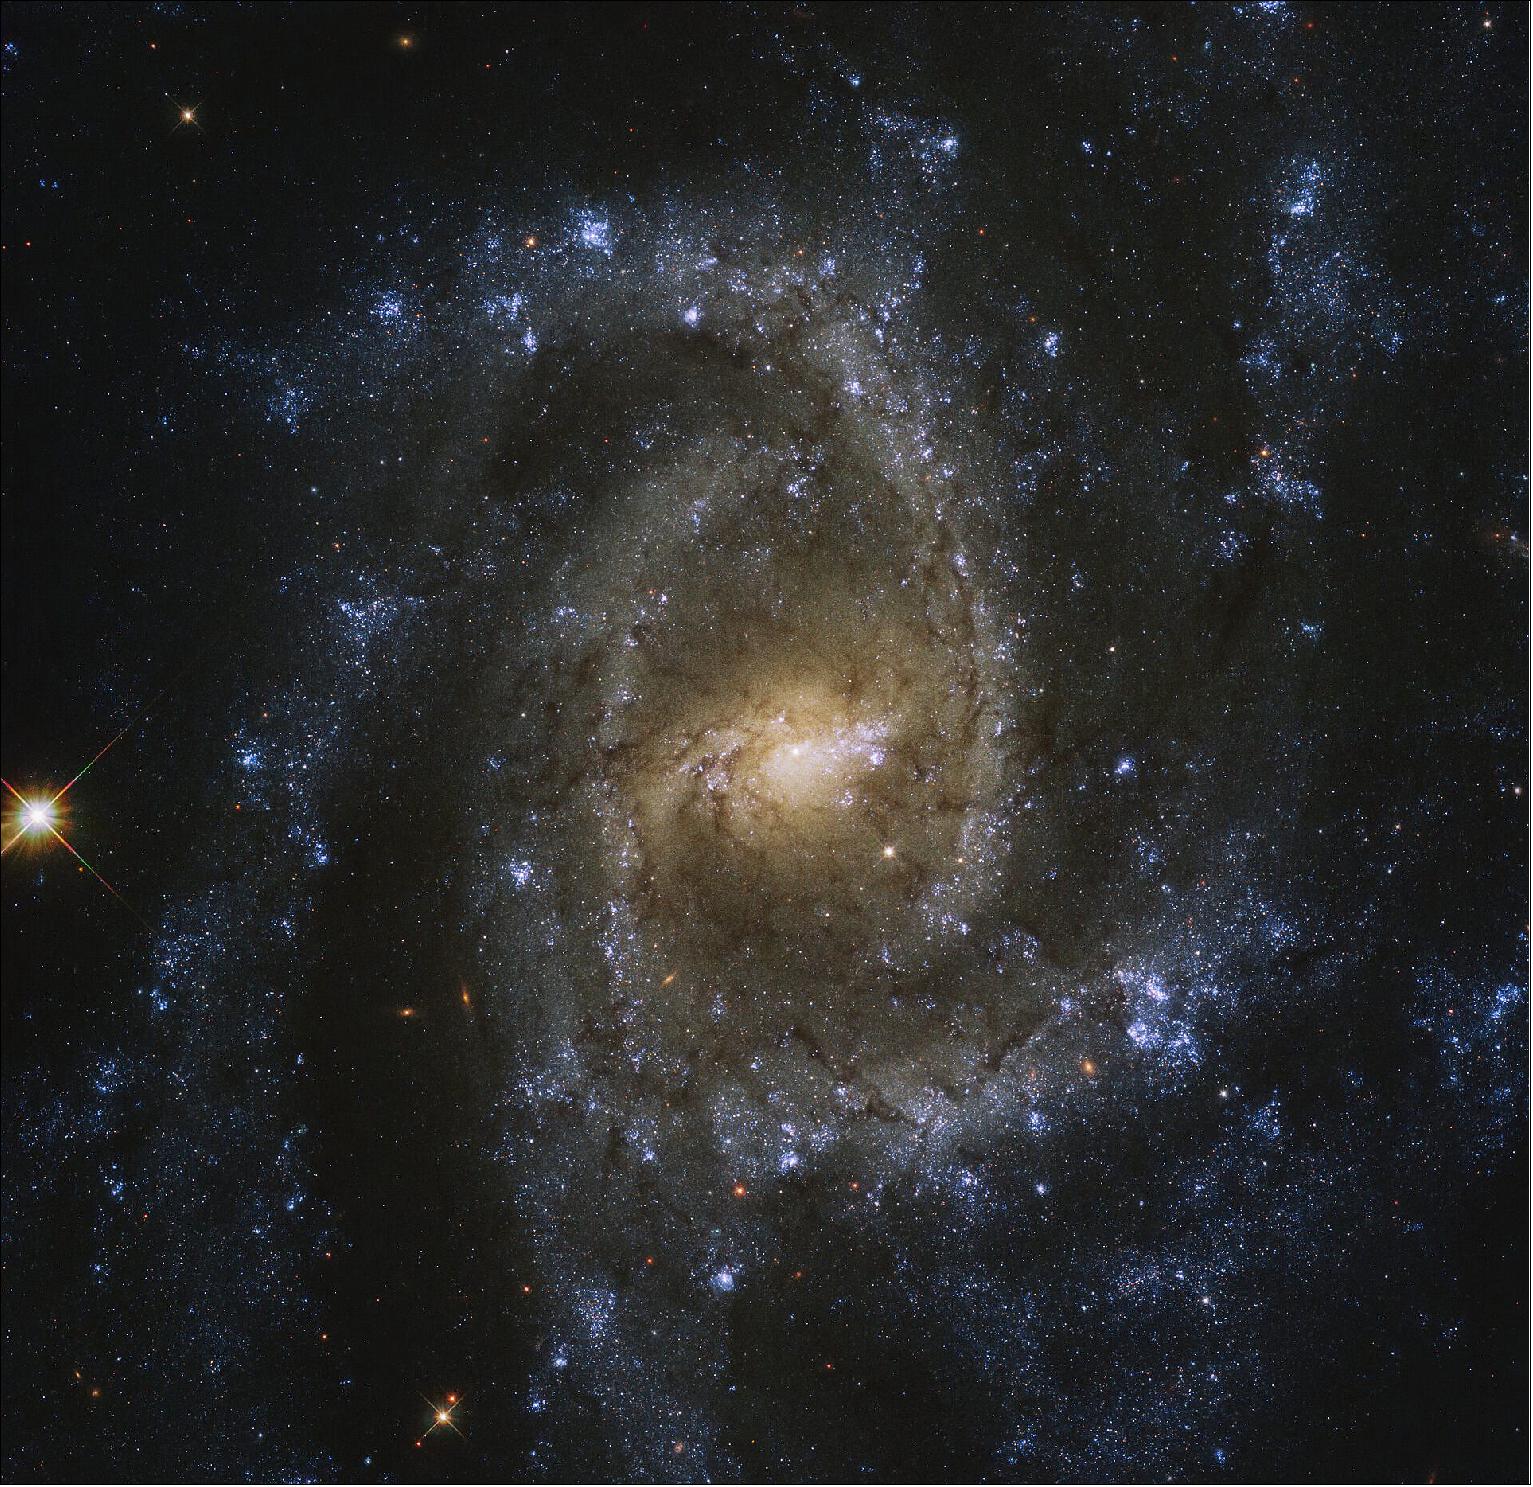 Figure 28: This galaxy was imaged as part of PHANGS-HST, a large galaxy survey with Hubble that aims to study the connections between cold gas and young stars in a variety of galaxies in the local Universe. Within NGC 2835, this cold, dense gas produces large numbers of young stars within large star formation regions. The bright blue areas, commonly observed in the outer spiral arms of many galaxies, show where near-ultraviolet light is being emitted more strongly , indicating recent or ongoing star formation (image credit: ESA/Hubble & NASA, J. Lee, and the PHANGS-HST Team Acknowledgement: Judy Schmidt (Geckzilla); CC BY 4.0)